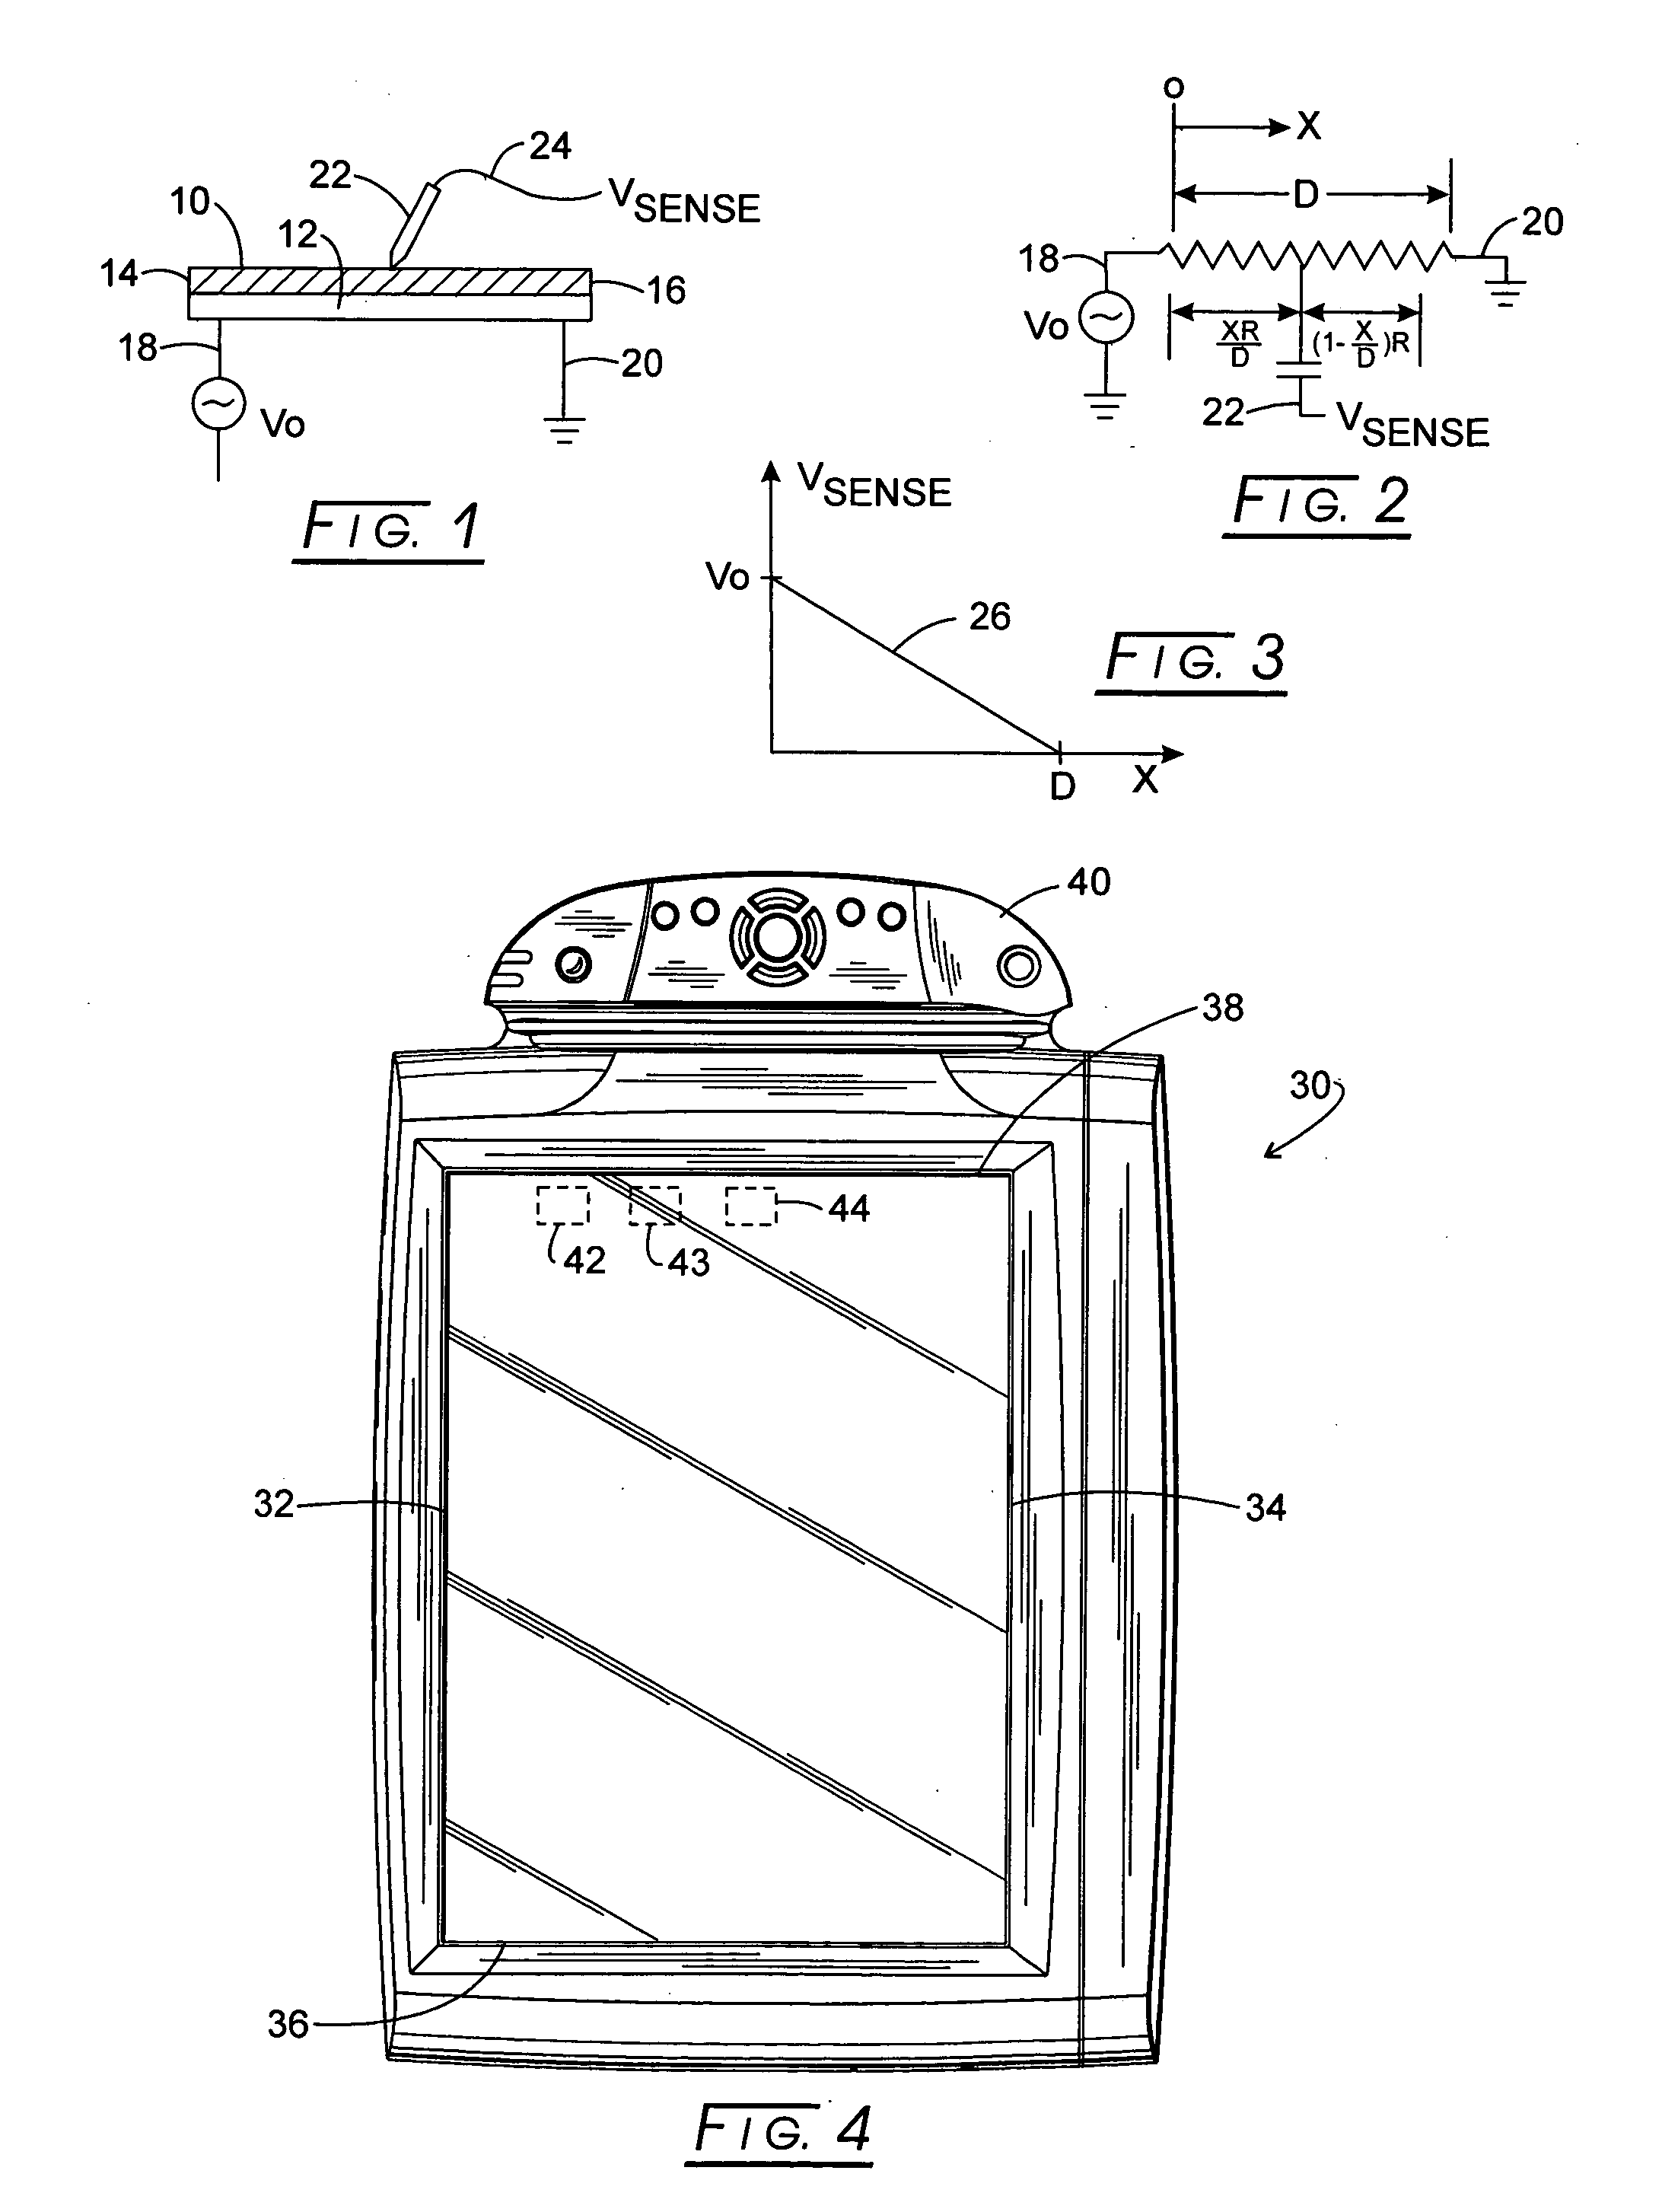 Pen apparatus, system, and method of assembly